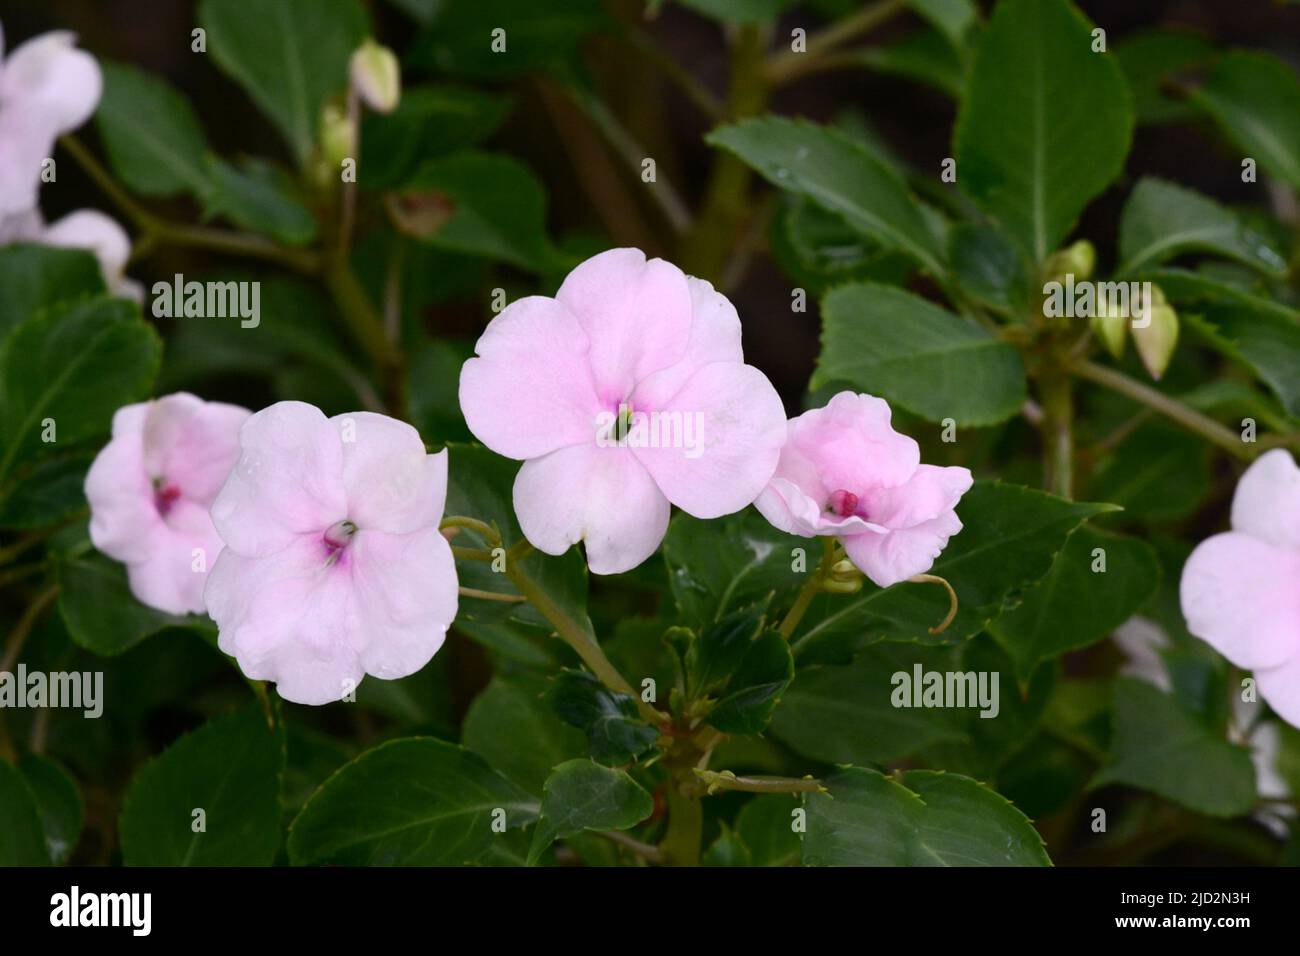 Pale pink flowers of Impatiens Ray of Hope Balsaminaceae Stock Photo